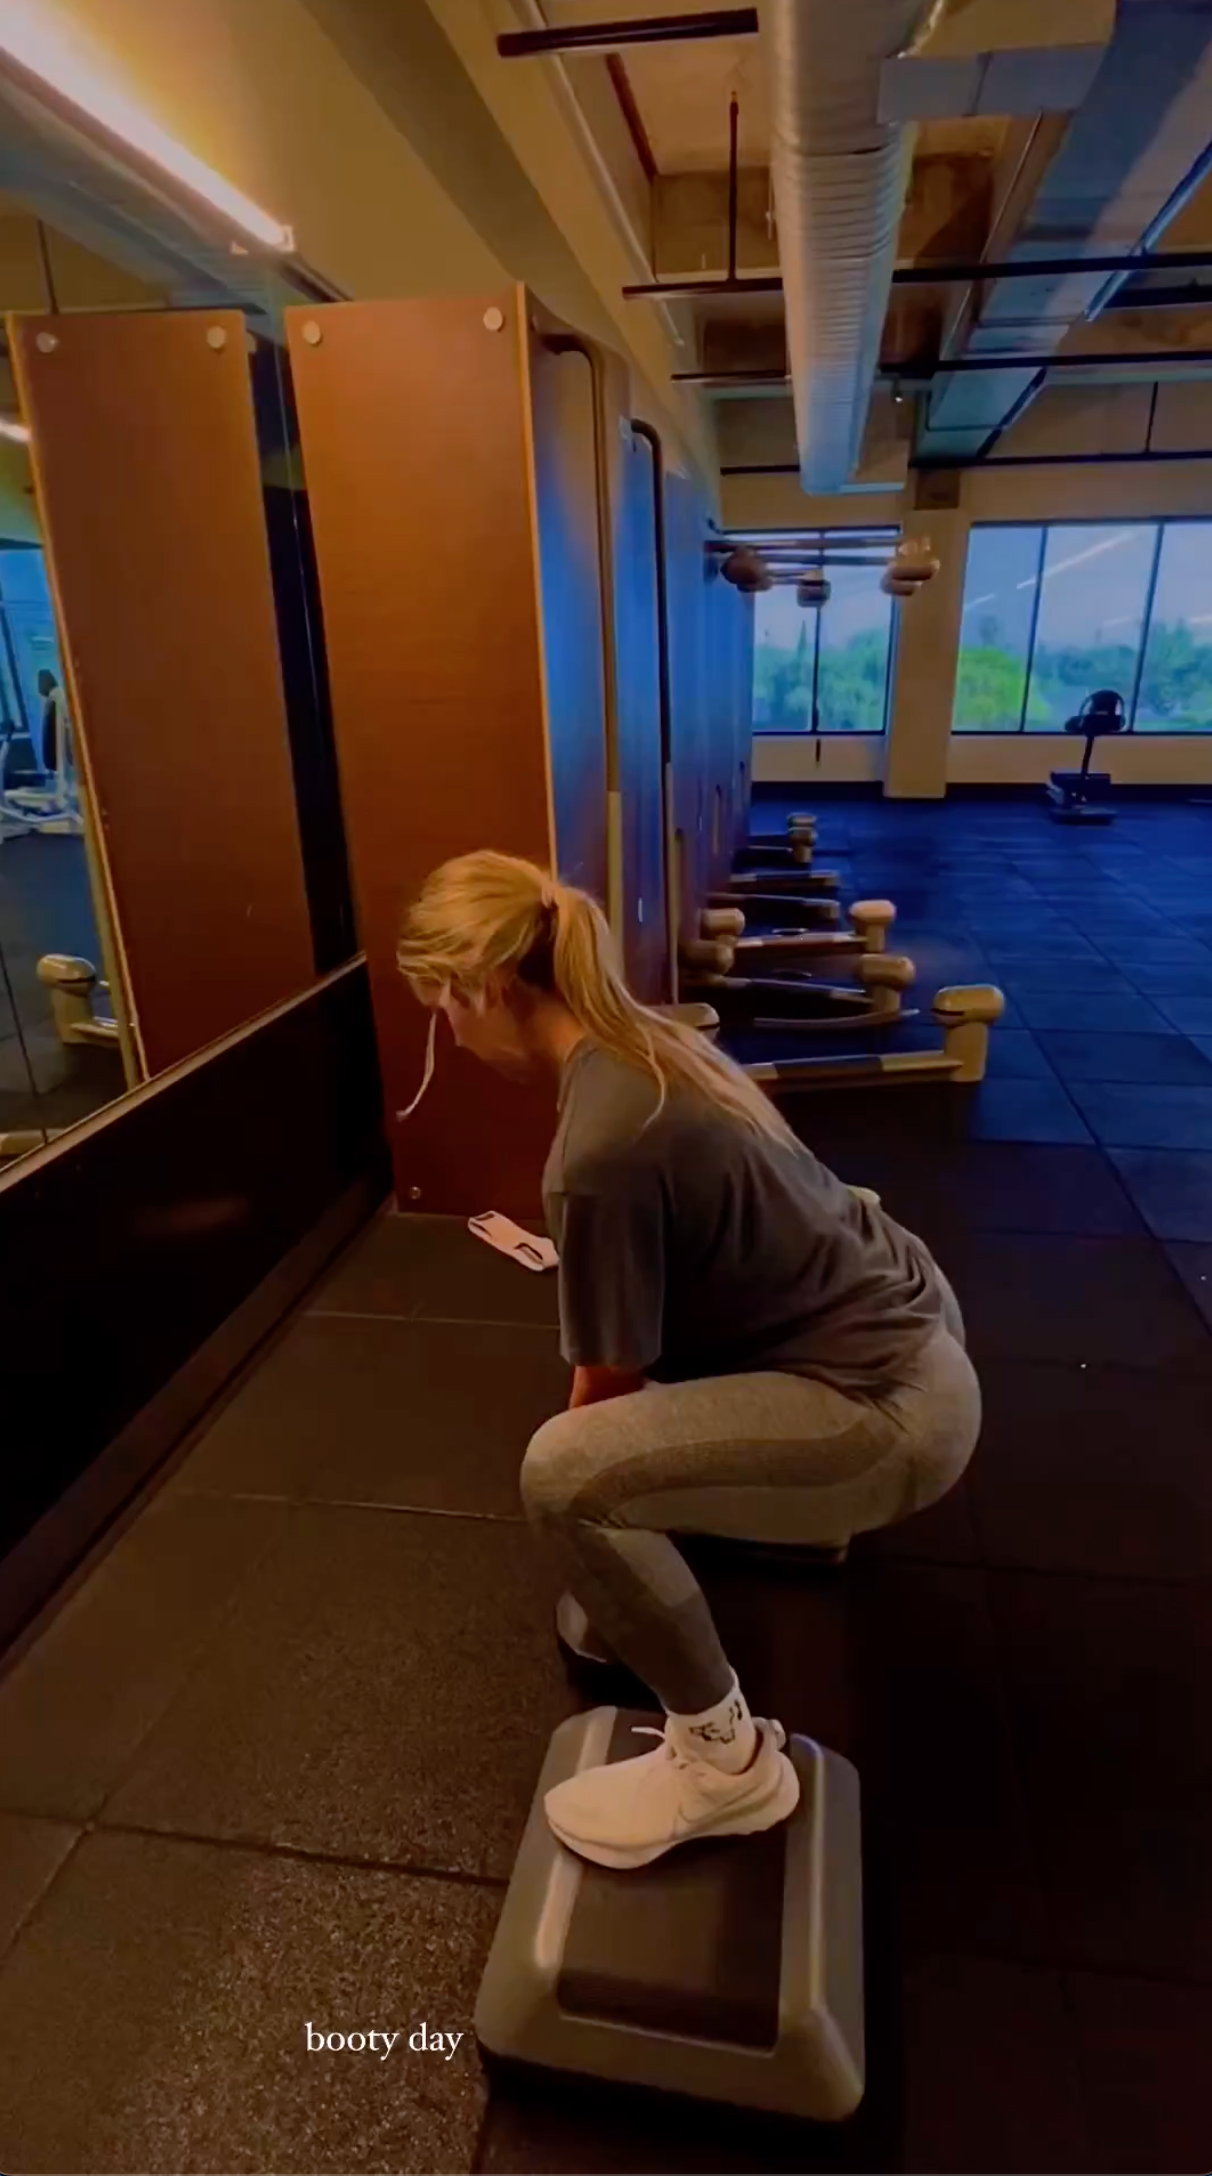 The American shared footage of herself from 'booty day' at the gym